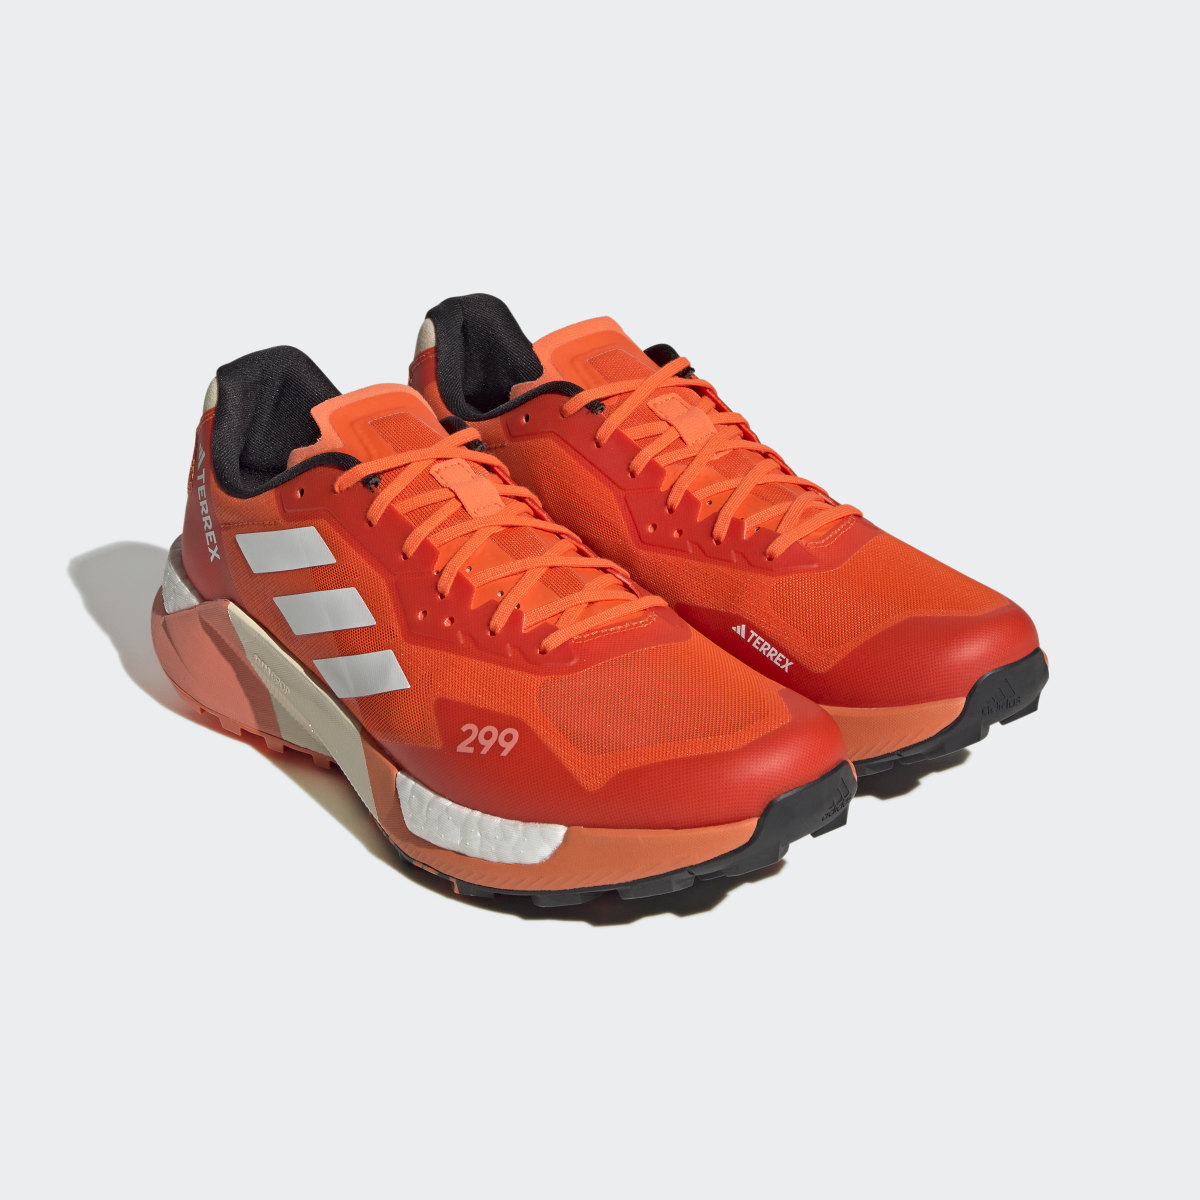 Adidas Terrex Agravic Ultra Trail Running Shoes. 5